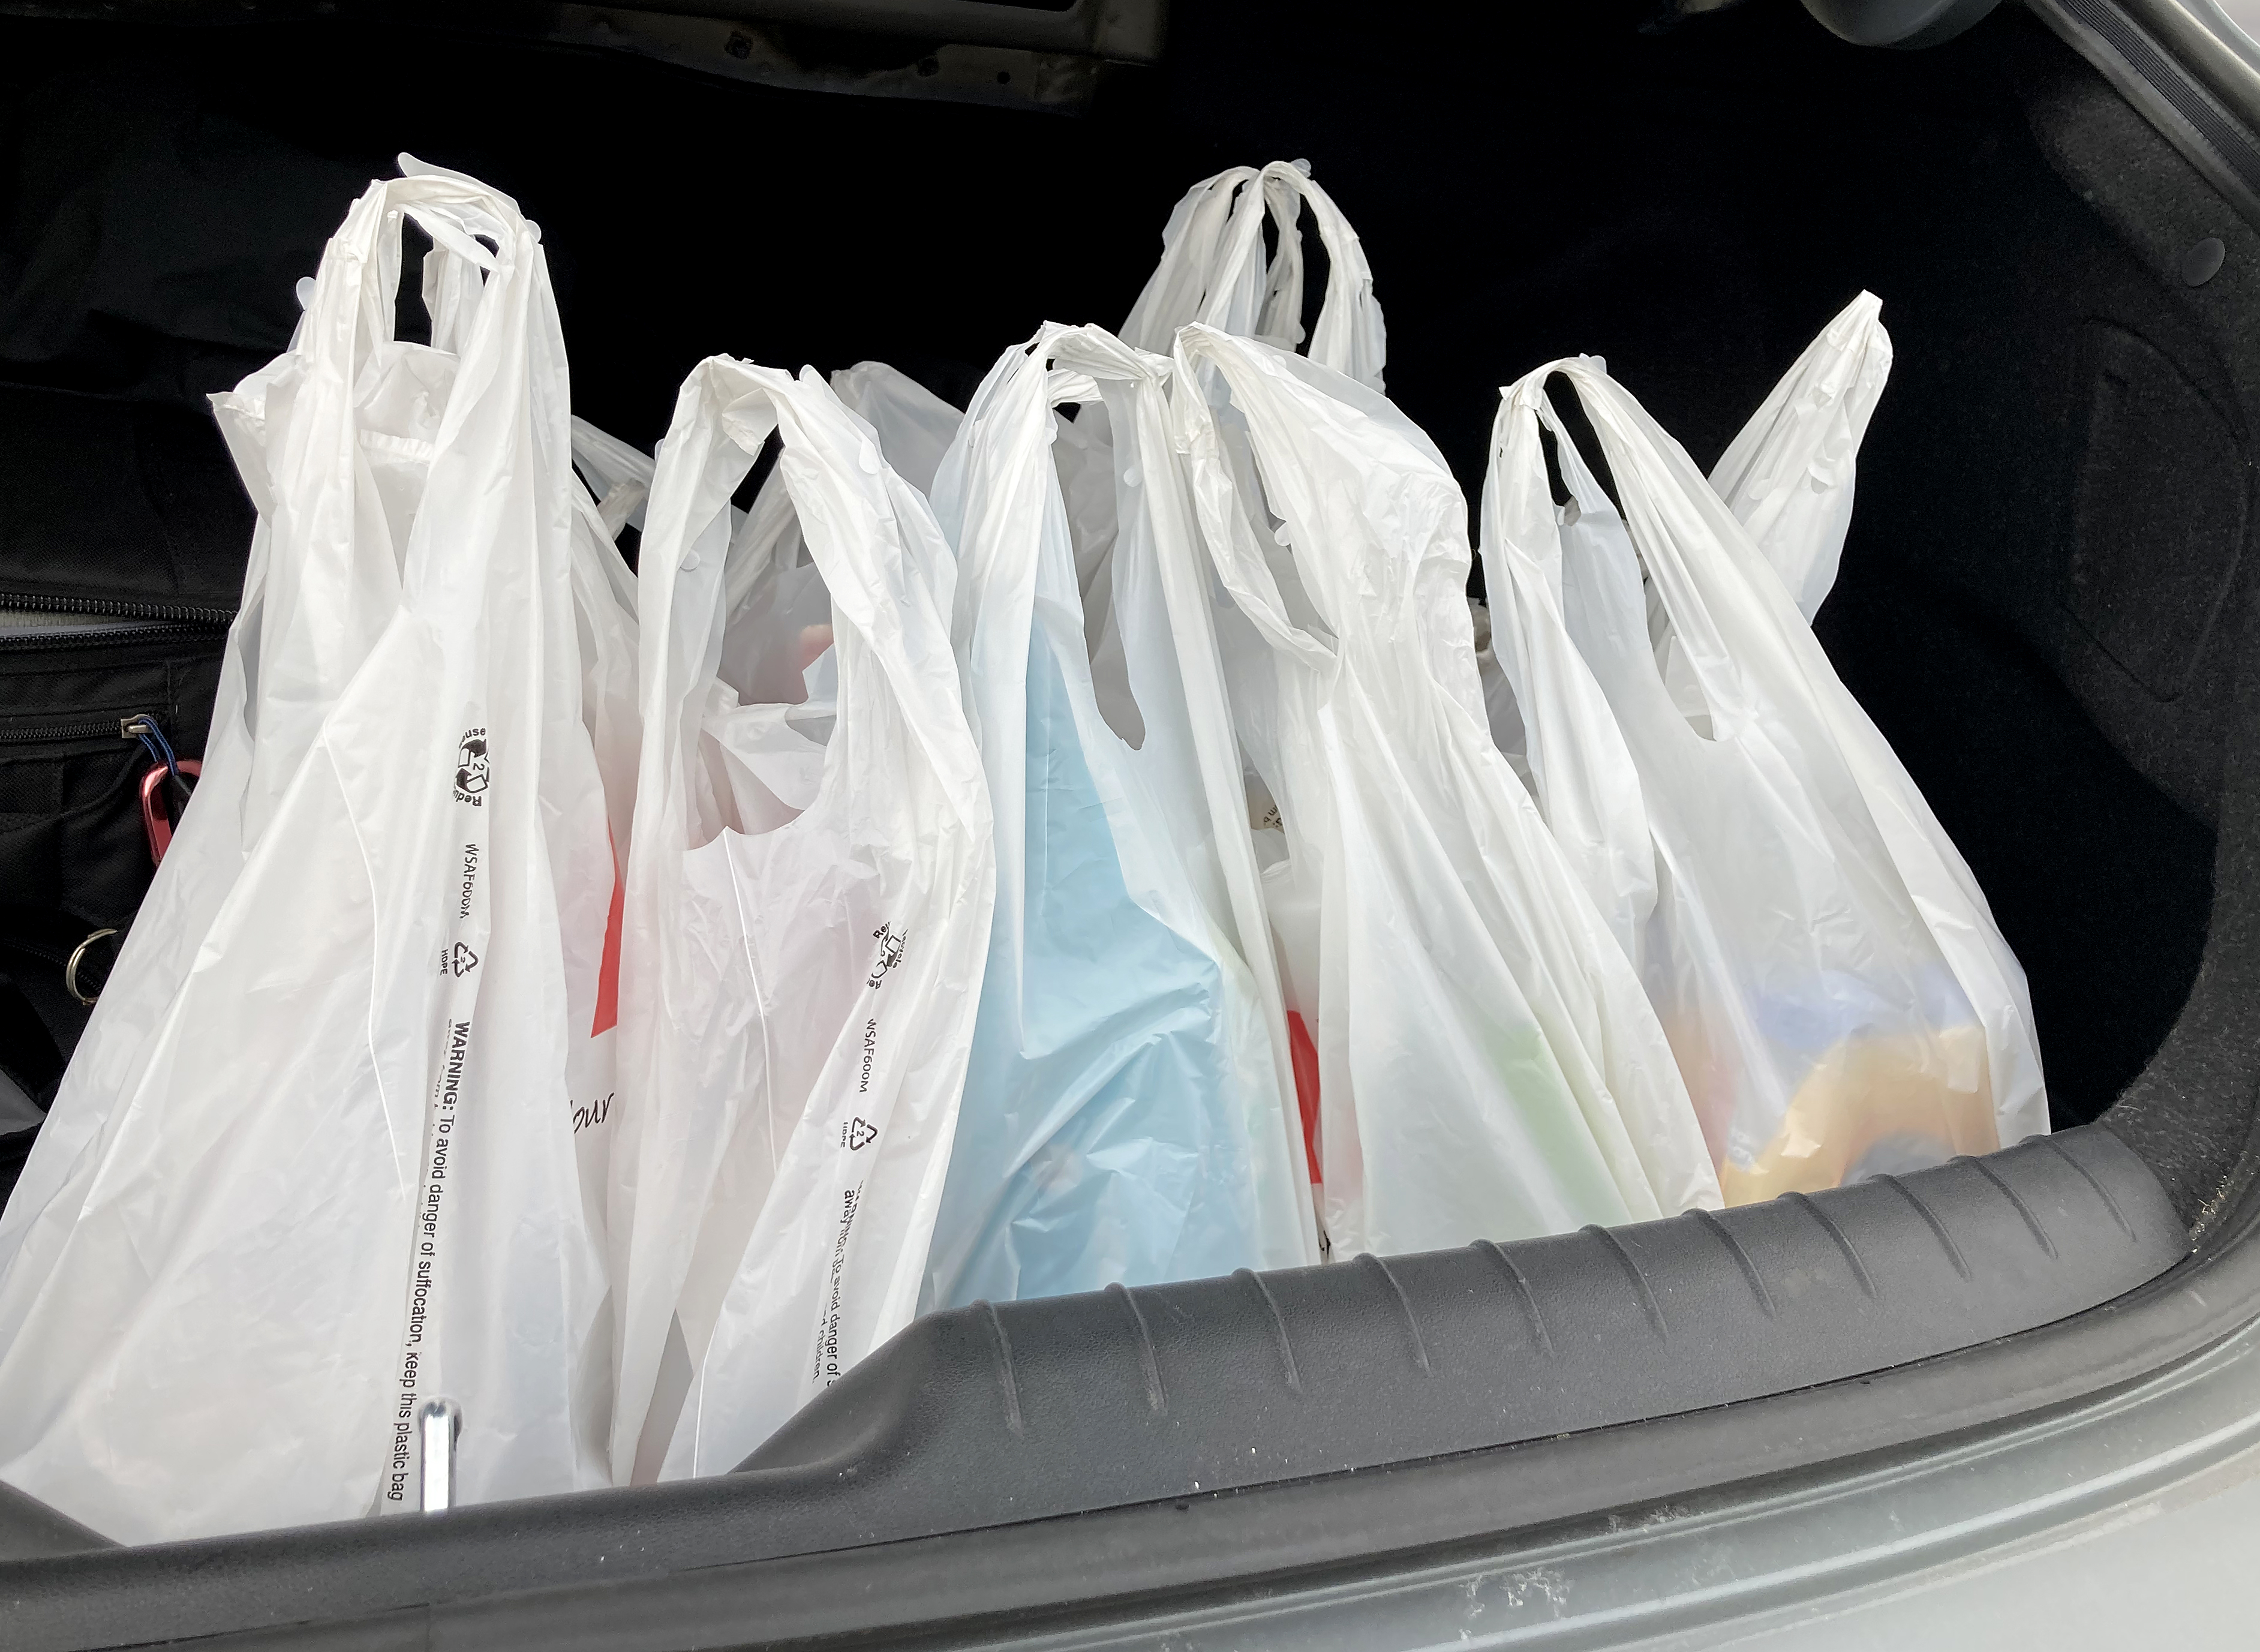 N.J. plastic bag ban: 23 answers to your urgent questions 